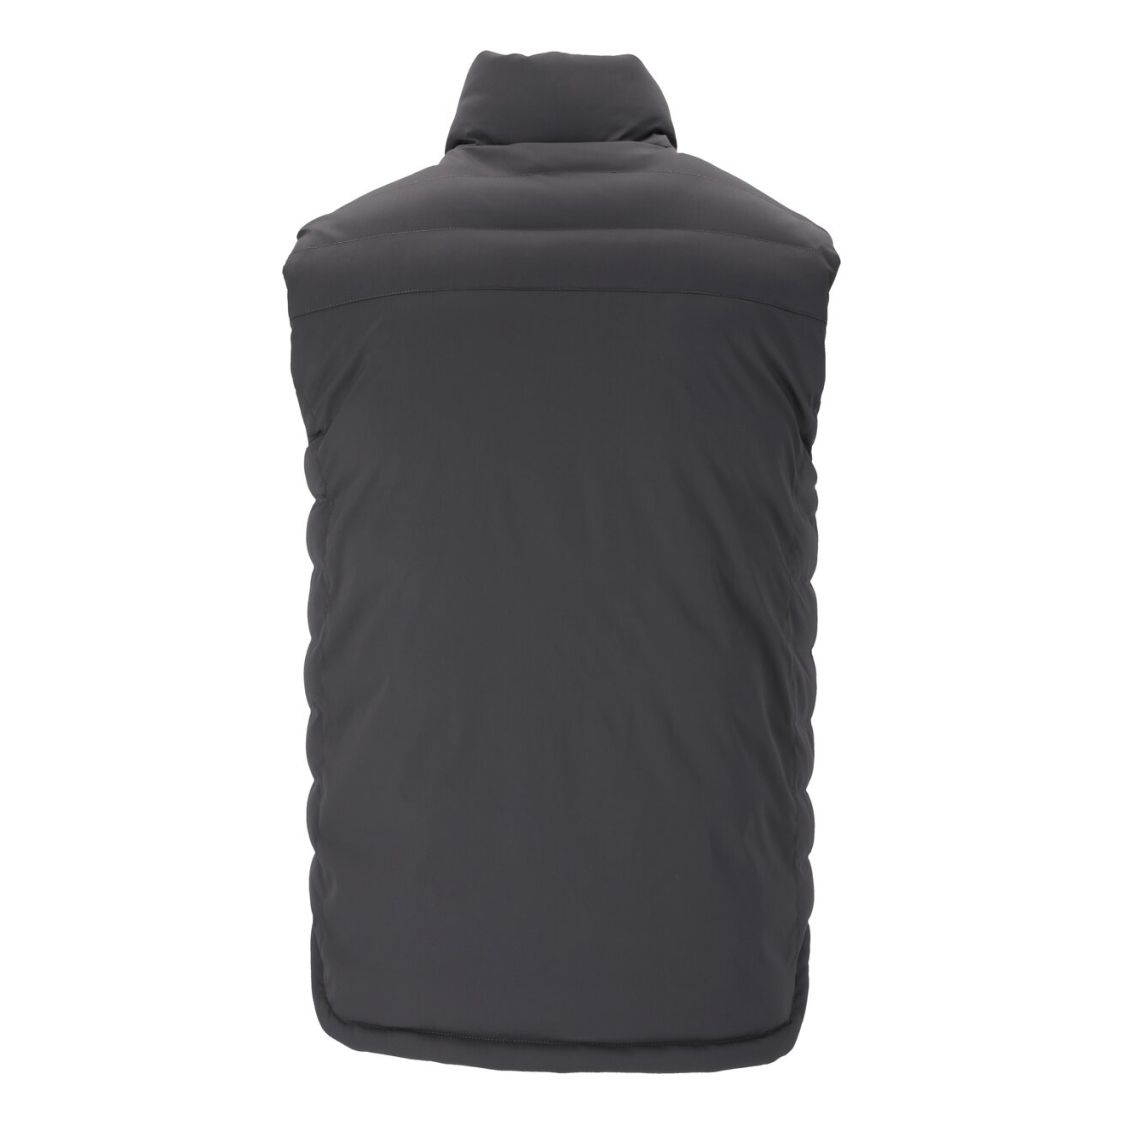 Winter Jackets -  sos Leogang M Insulated Vest